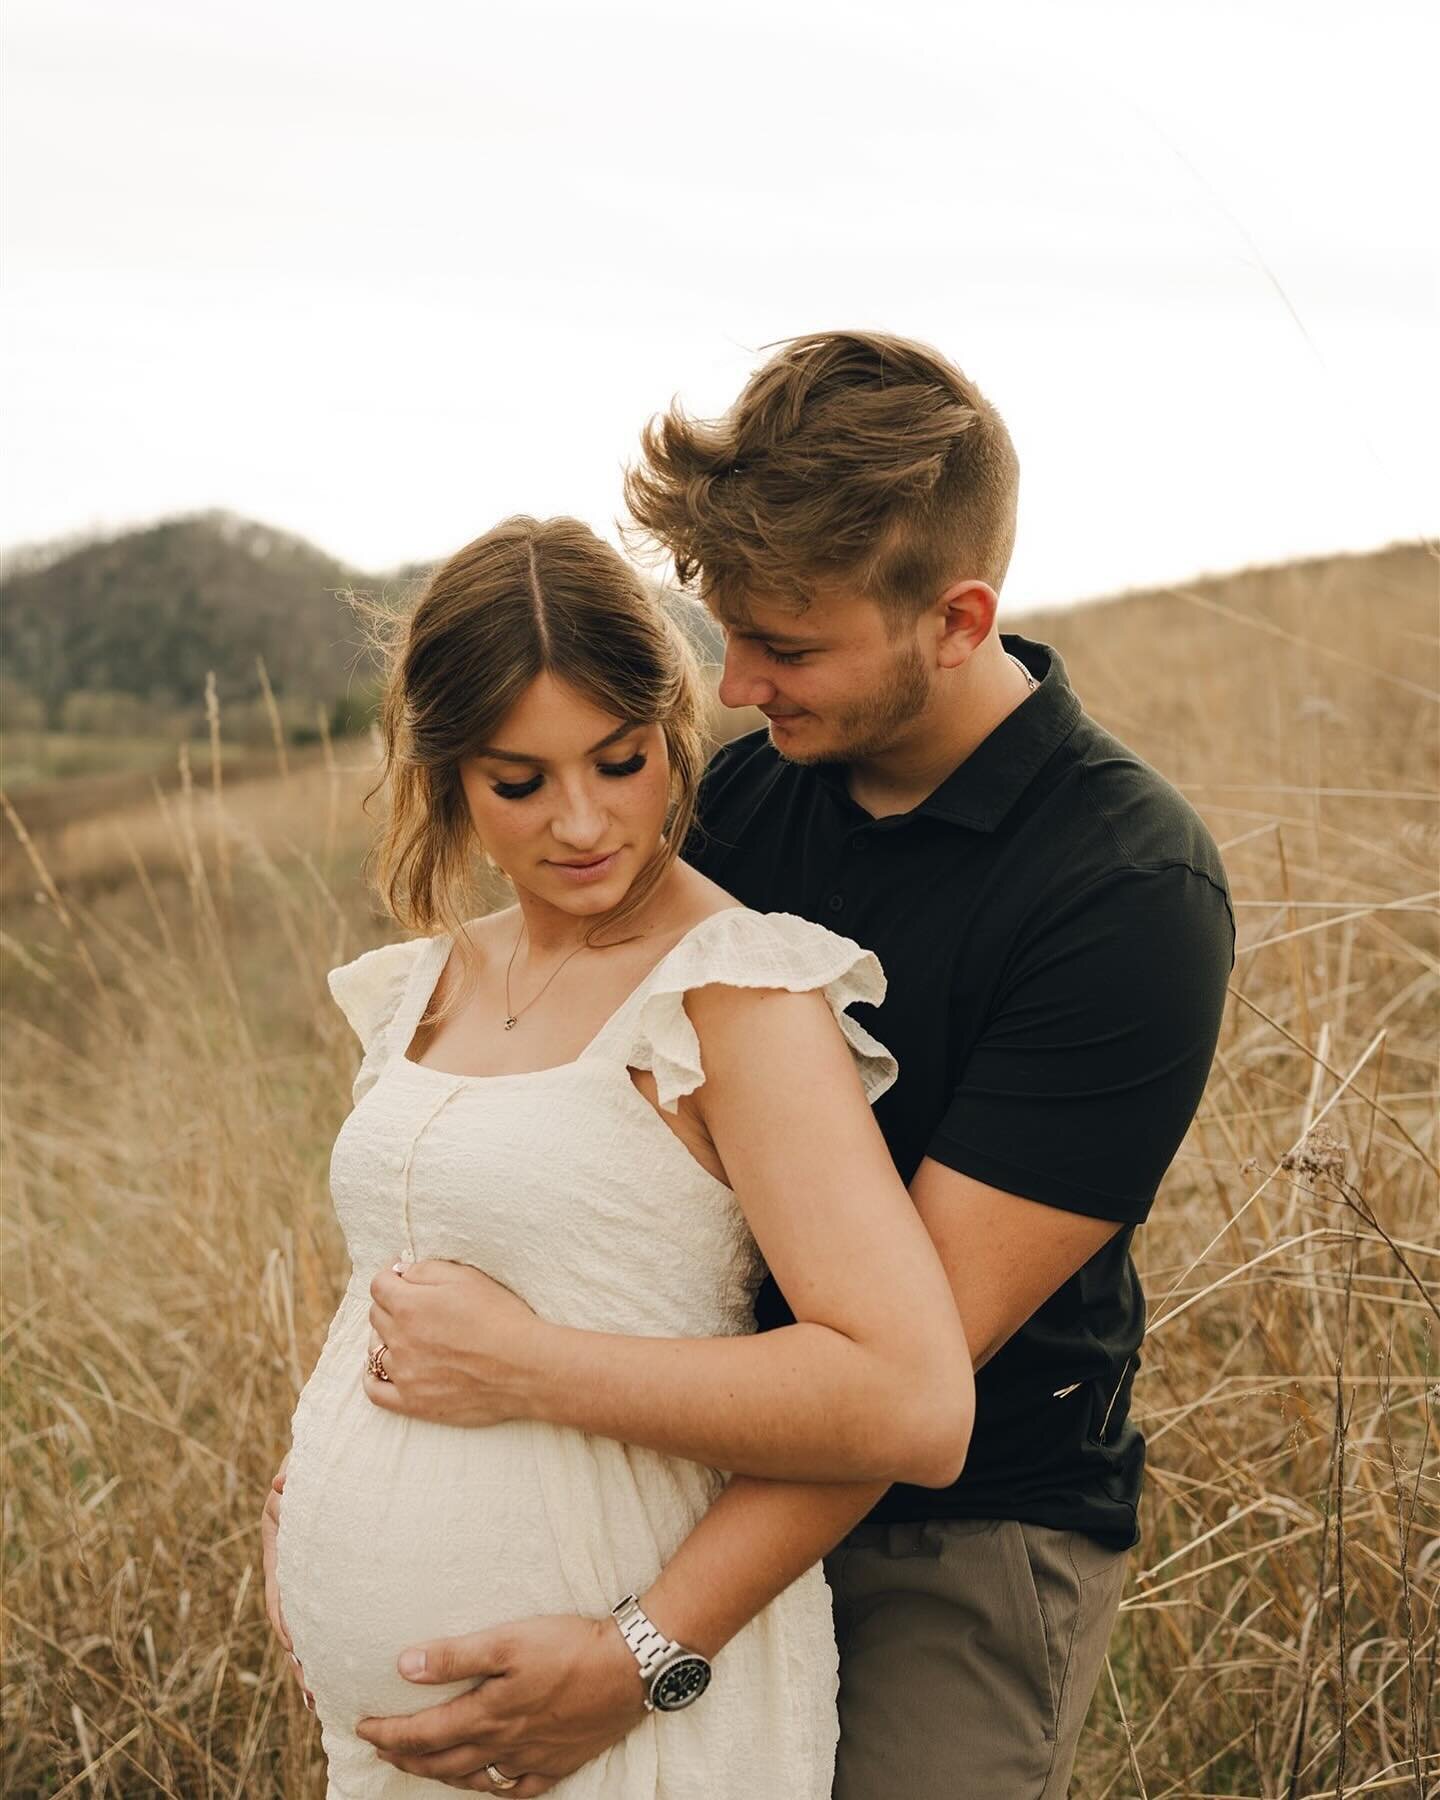 Capturing these moments for Rebecca and Tyler has been such a joy and honor for me as a photographer. From their engagement to their wedding, and now their maternity photos, it has been amazing to witness their journey and growth as a couple. Baby Th